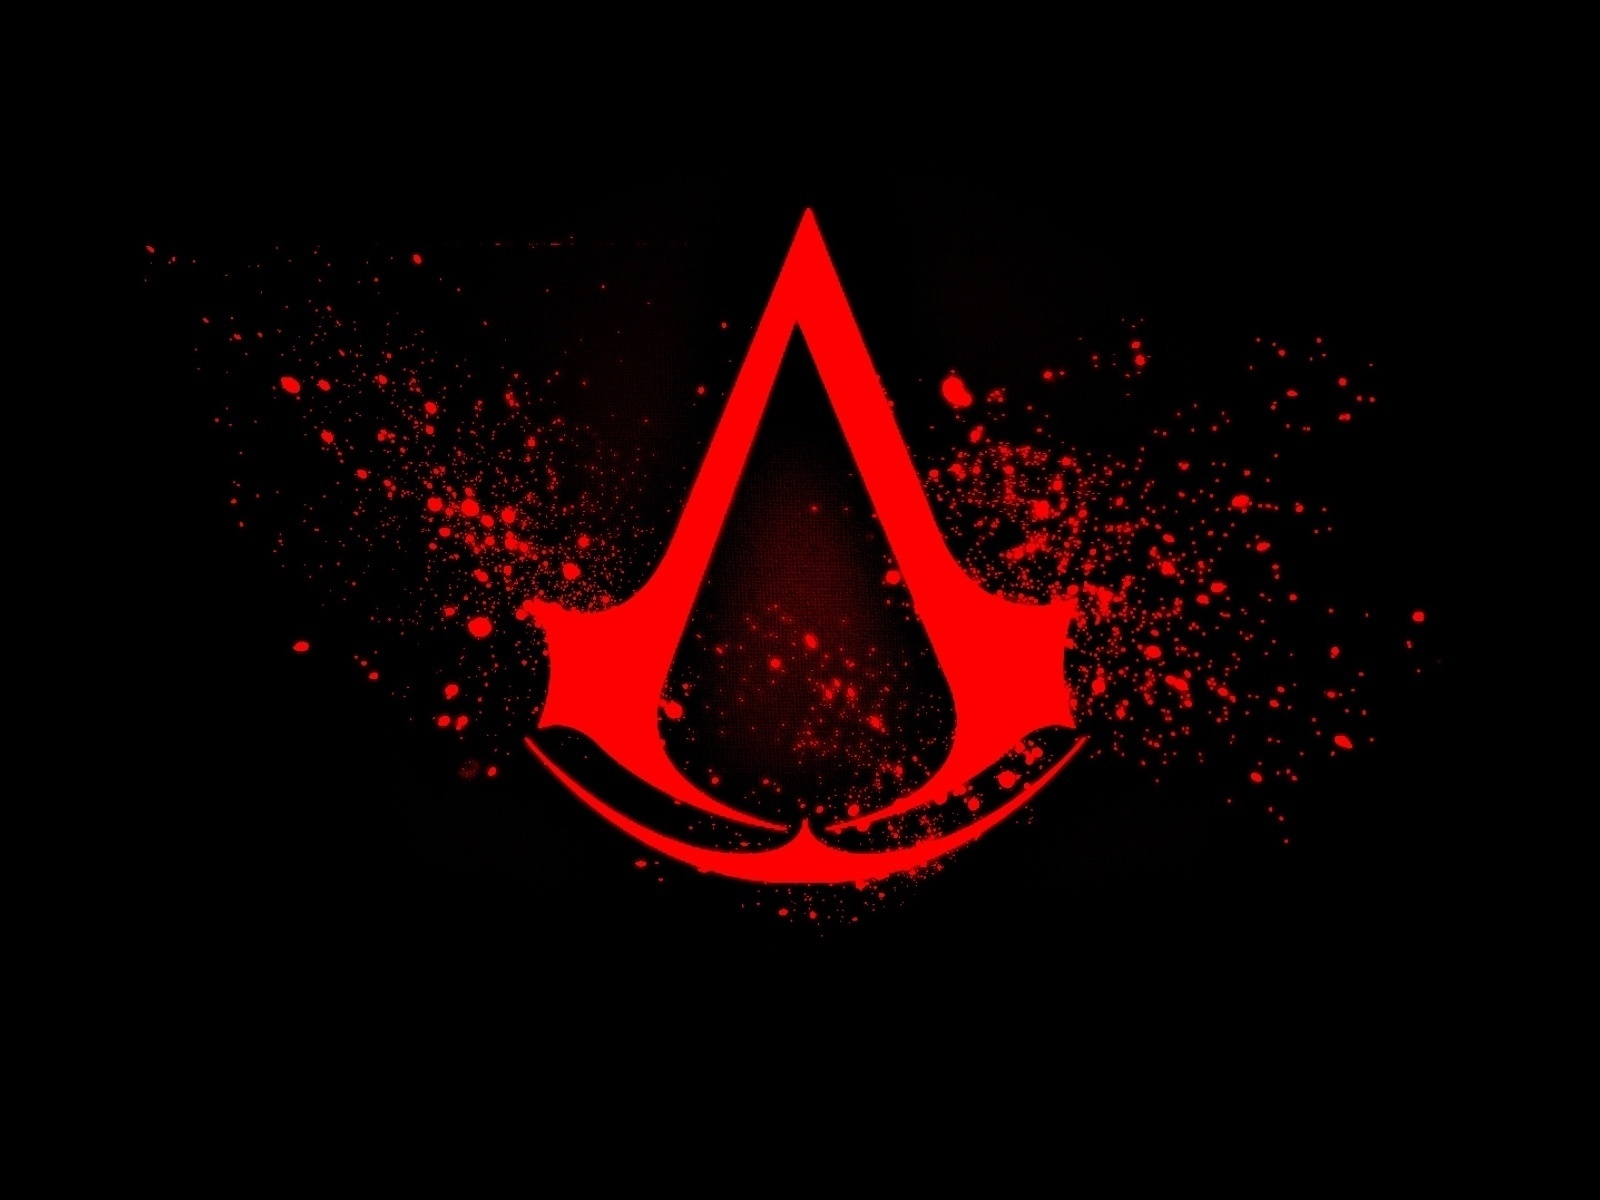 assassin's creed, games, logos, background, black